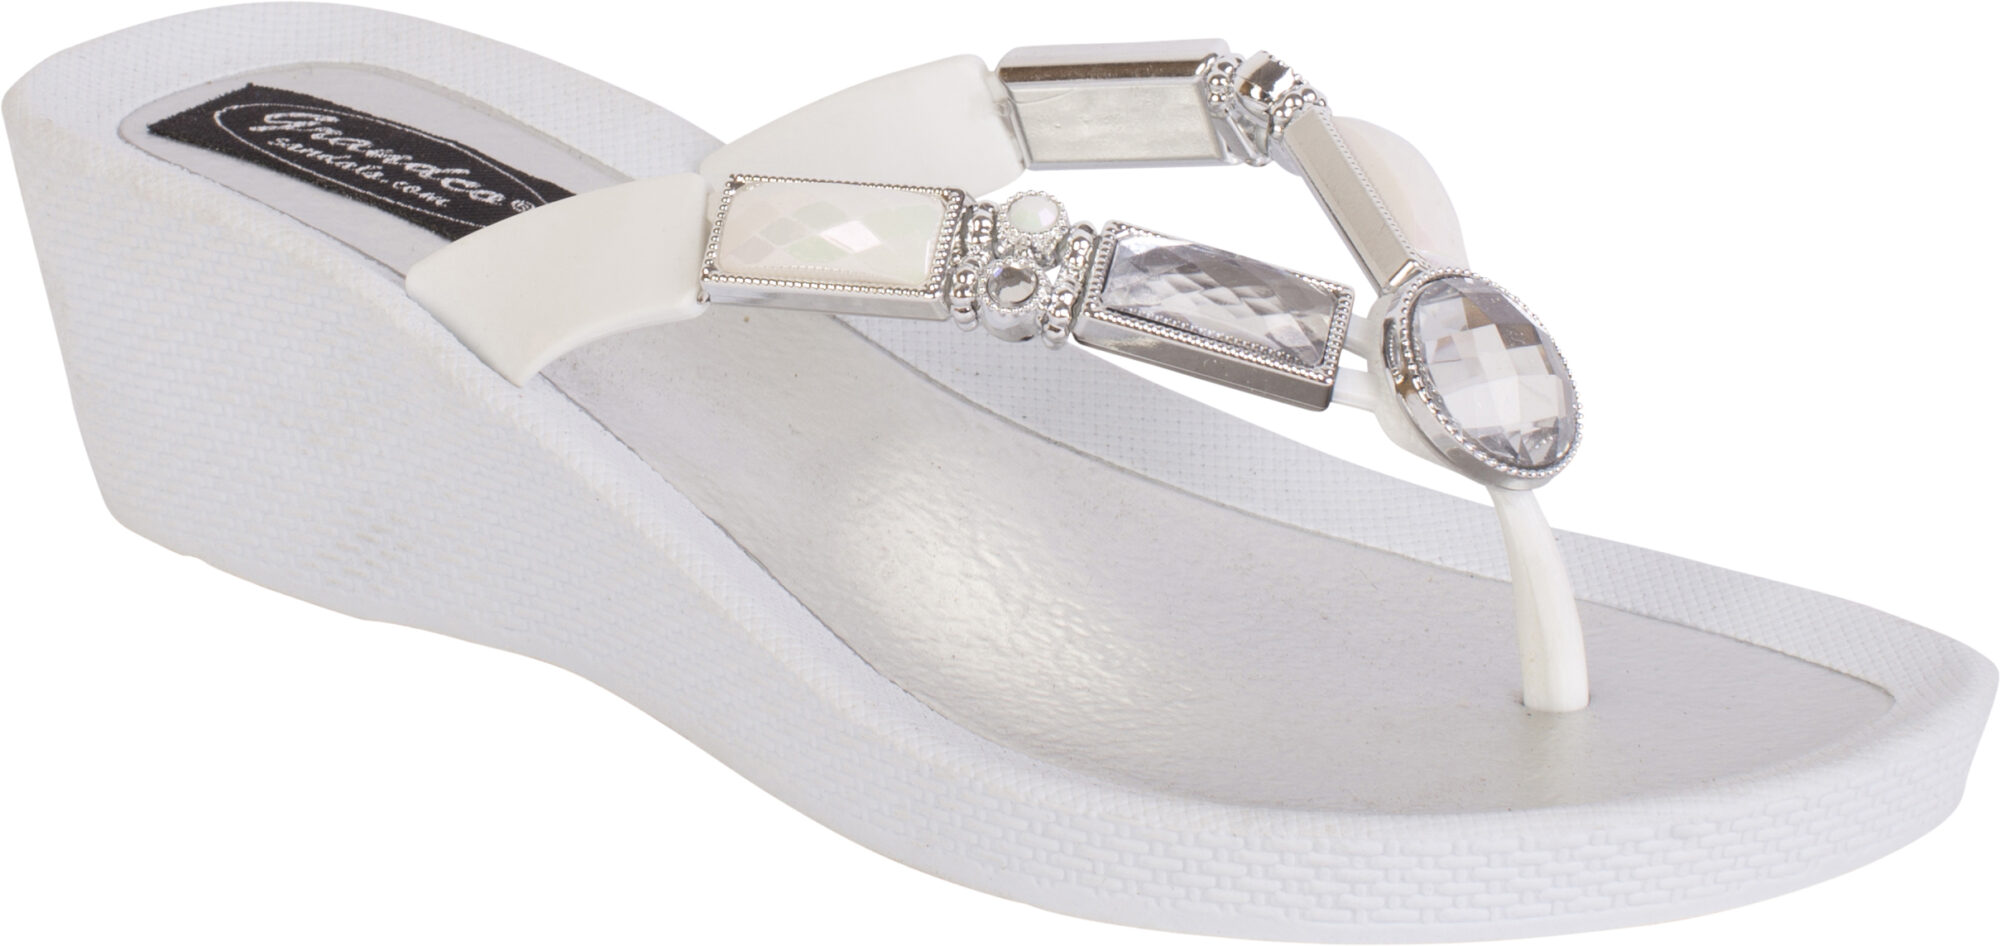 Bamboo Wedge - White - The Shoe Collective